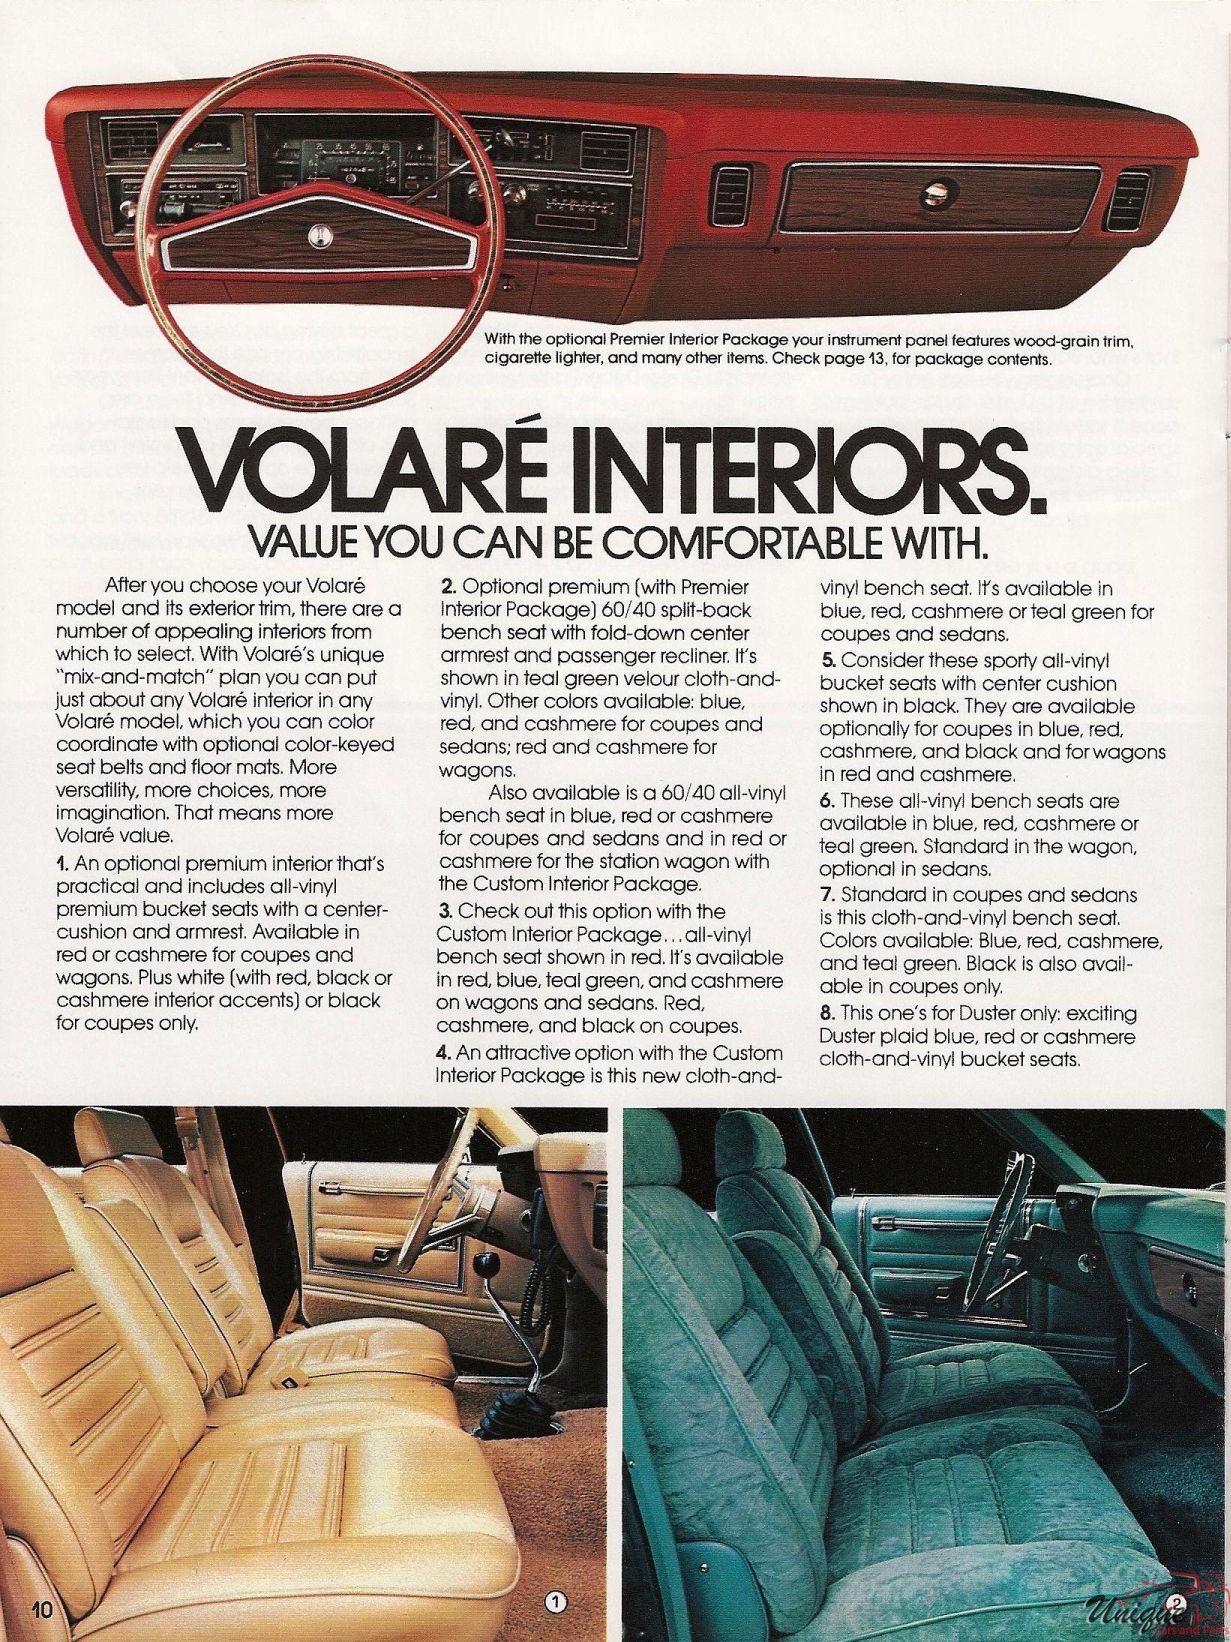 1979 Plymouth Volare Brochure Page 15